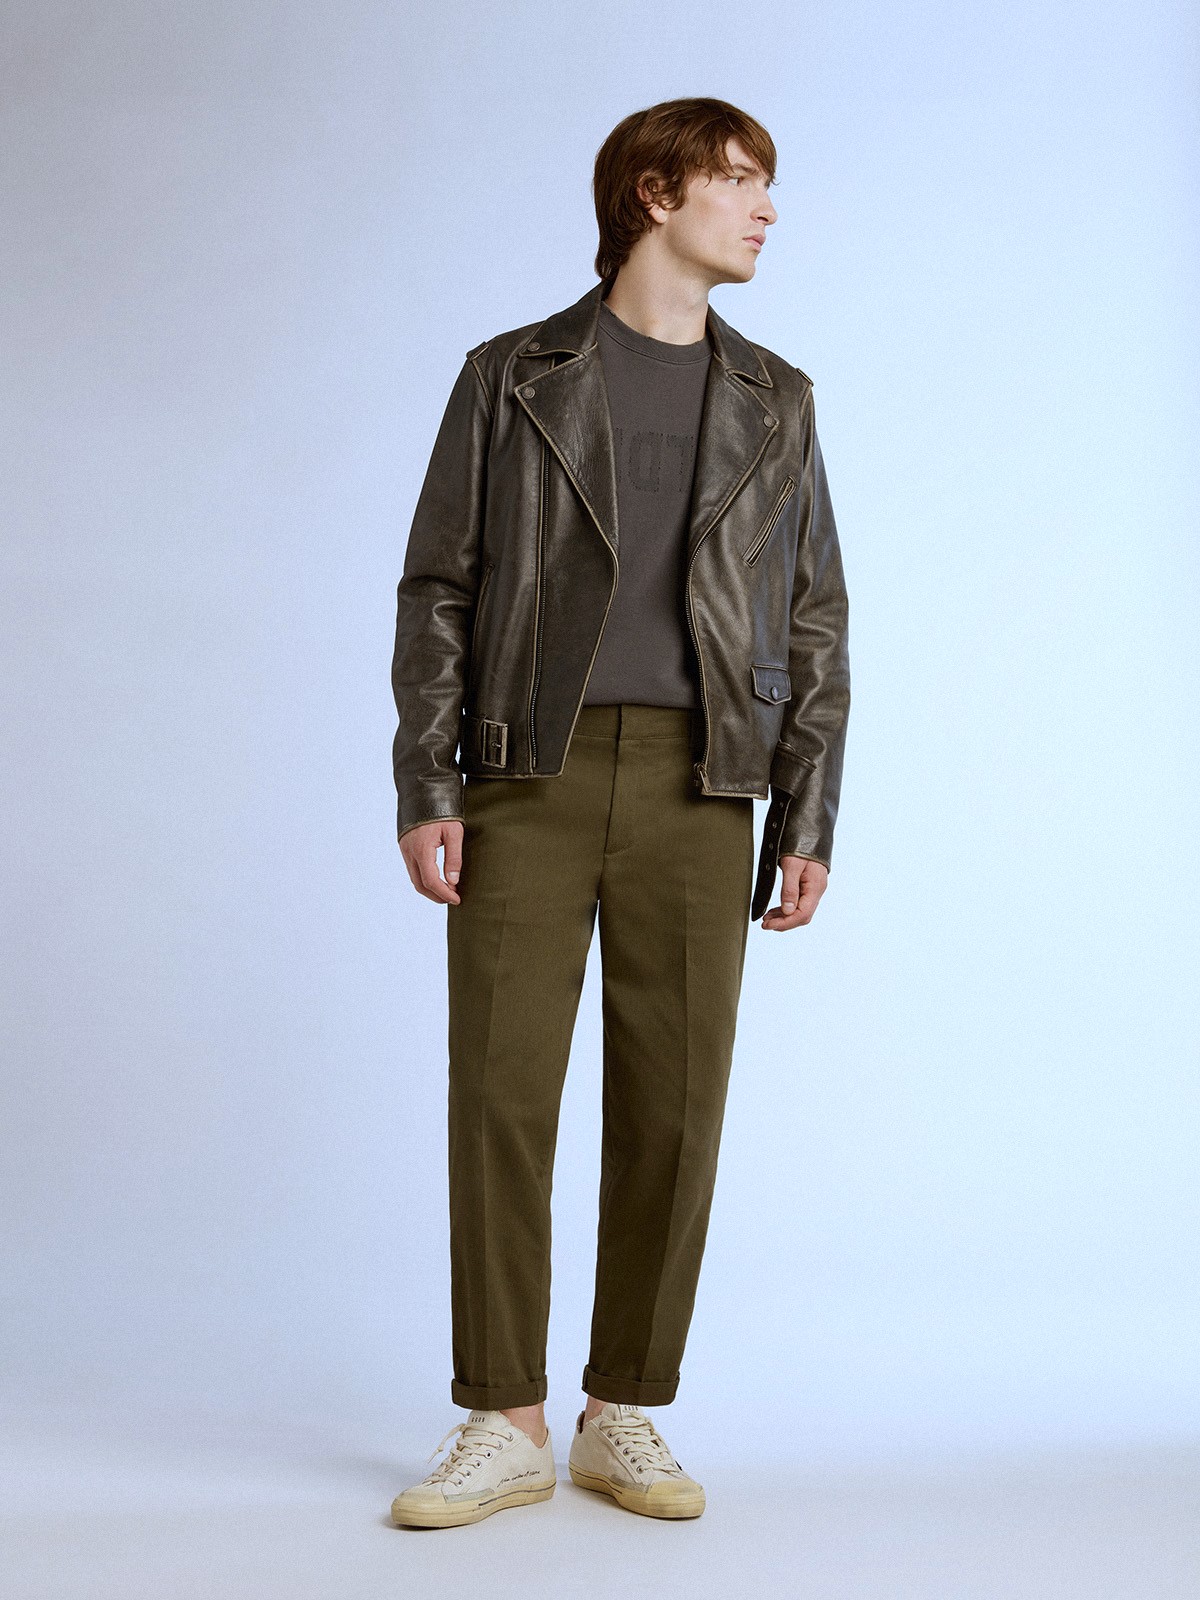 GOLDEN GOOSE Chino Skate Pants in Olive